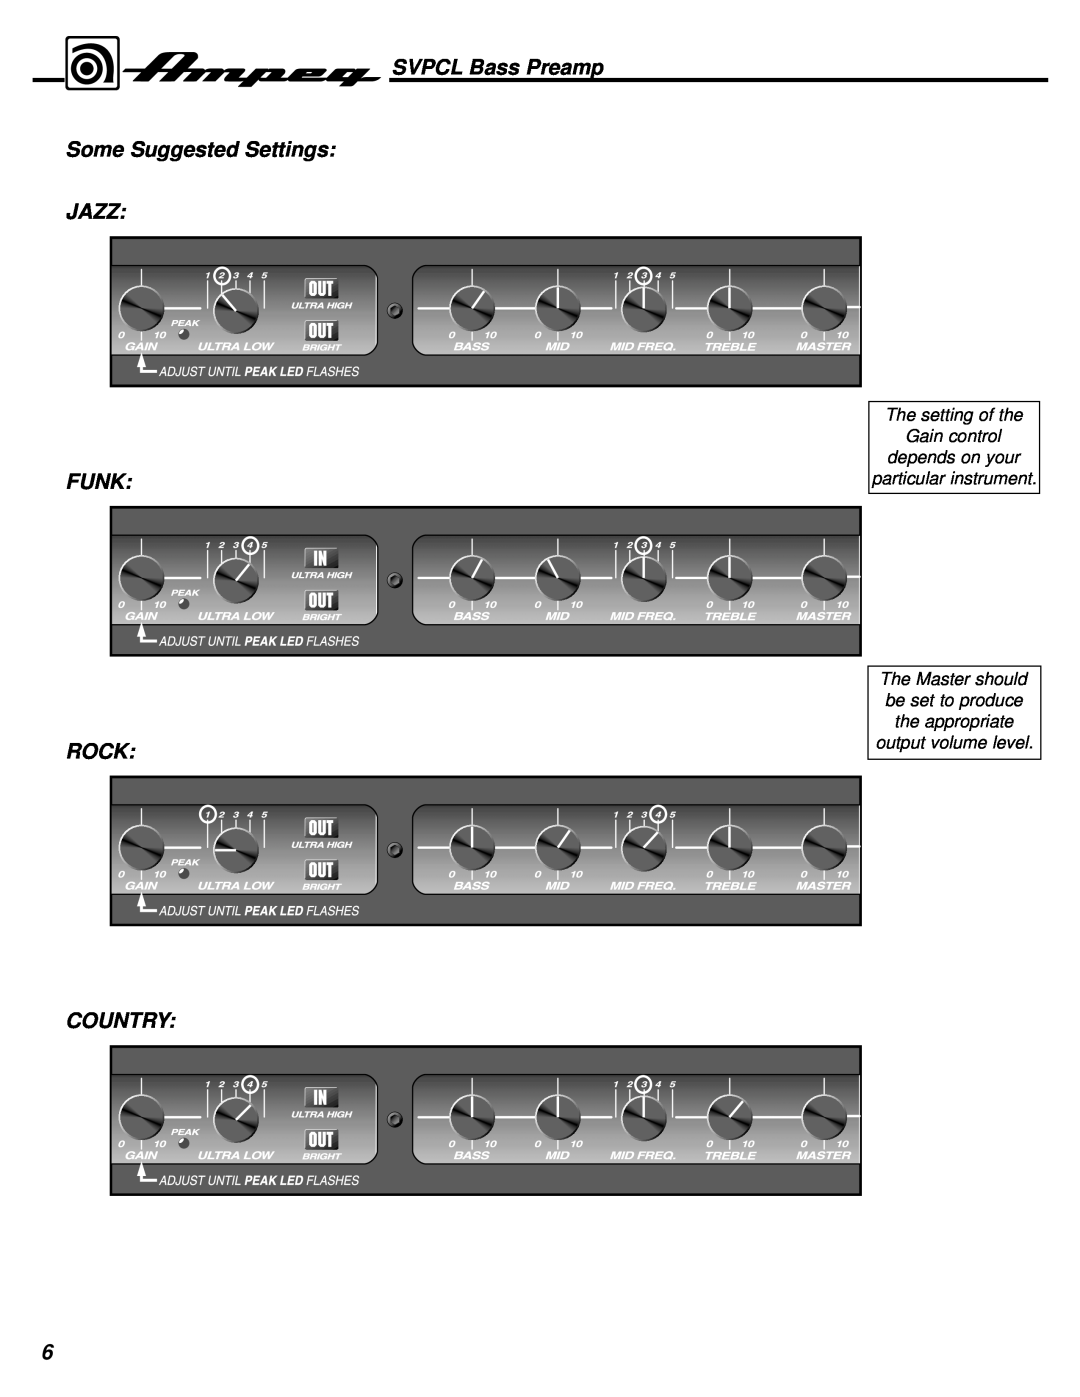 Ampeg manual Some Suggested Settings JAZZ, Funk, Rock, SVPCL Bass Preamp, Country, The setting of the, Gain control 